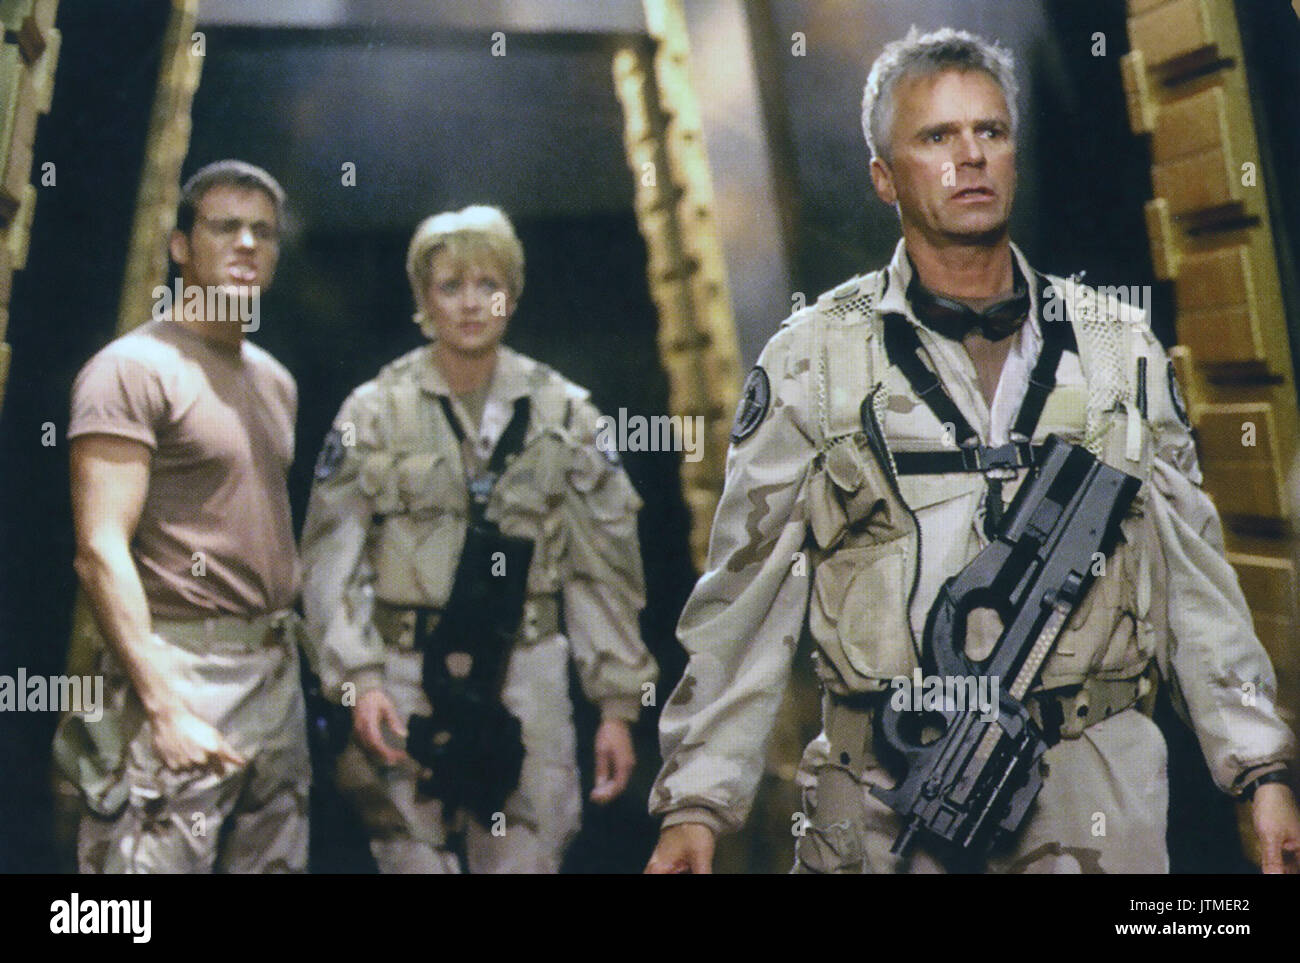 STARGATE SG-1 MGM TV sci-fi series 1997-2007 with from left : Michael Shanks, Amanda Tapping, Richard Dean Anderson Stock Photo